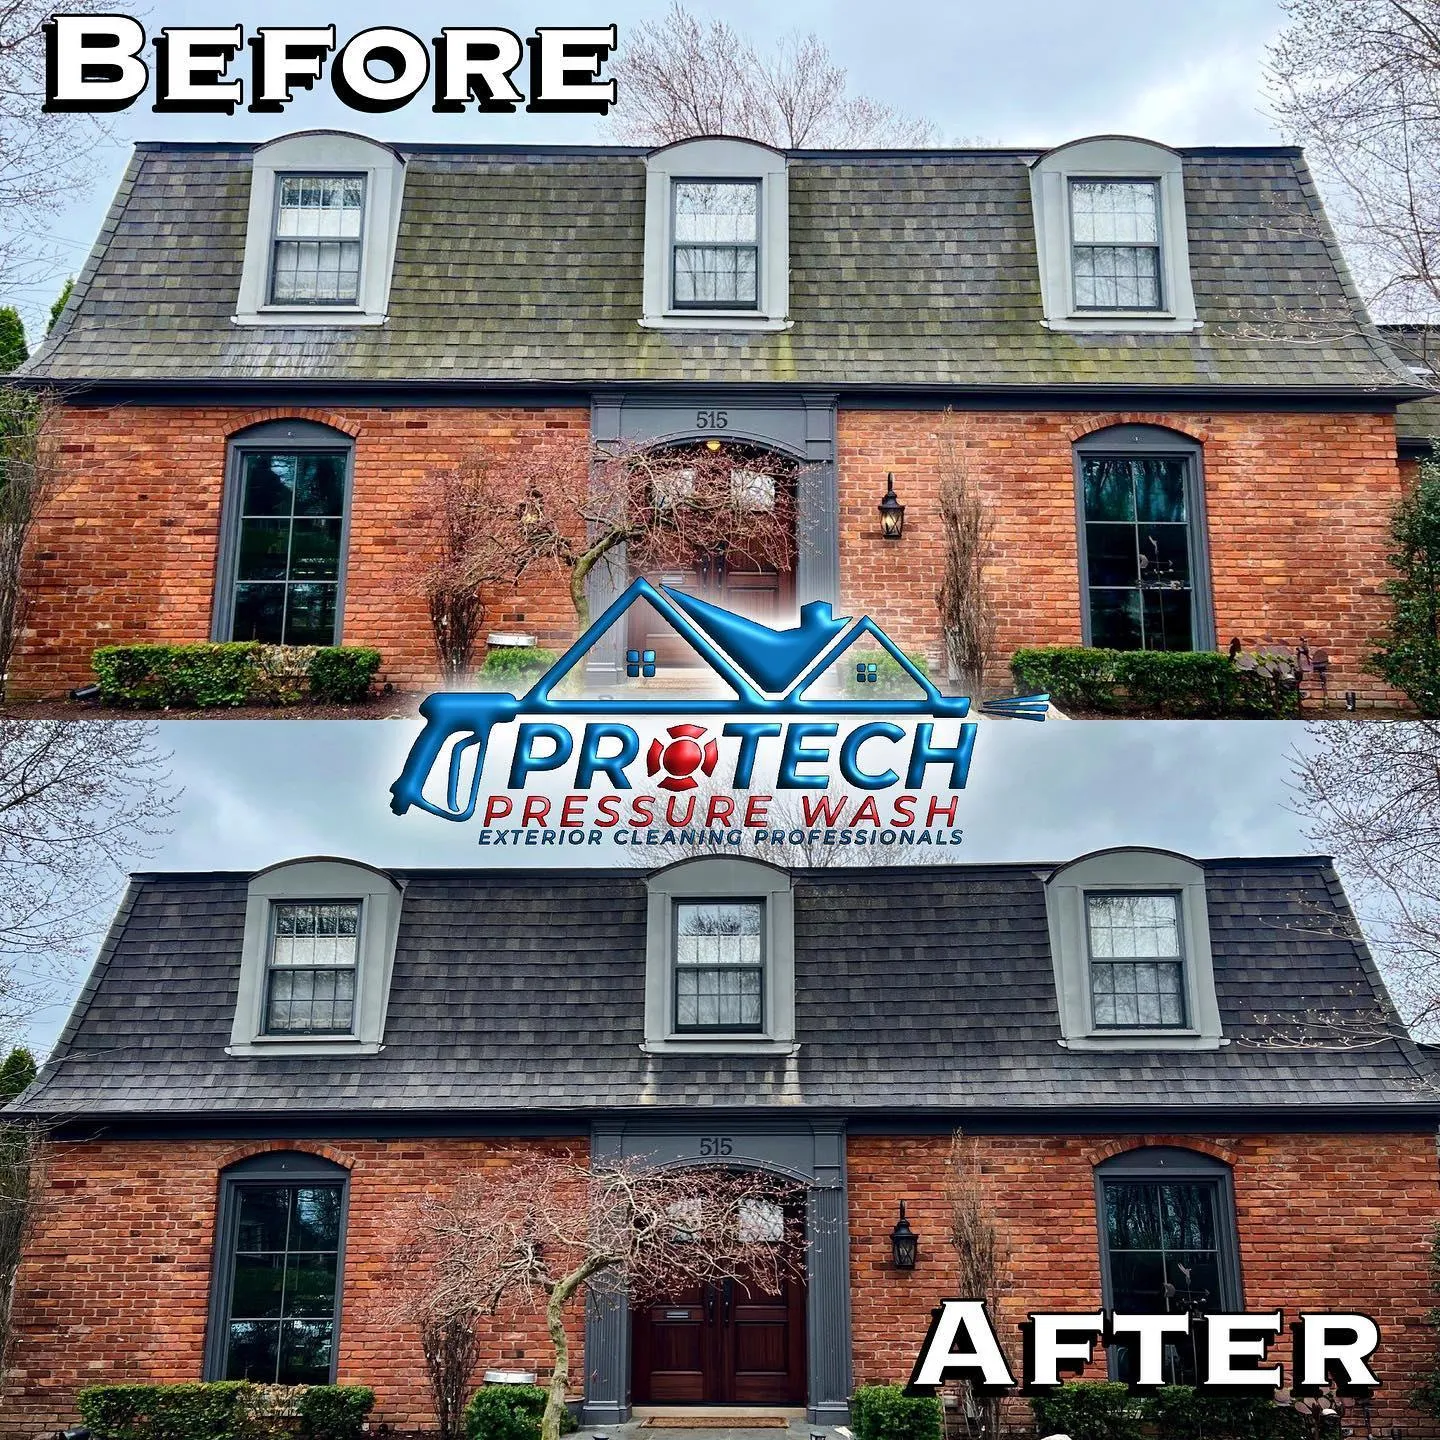 House Washing for ProTech Pressure Wash LLC in Clinton Township, MI